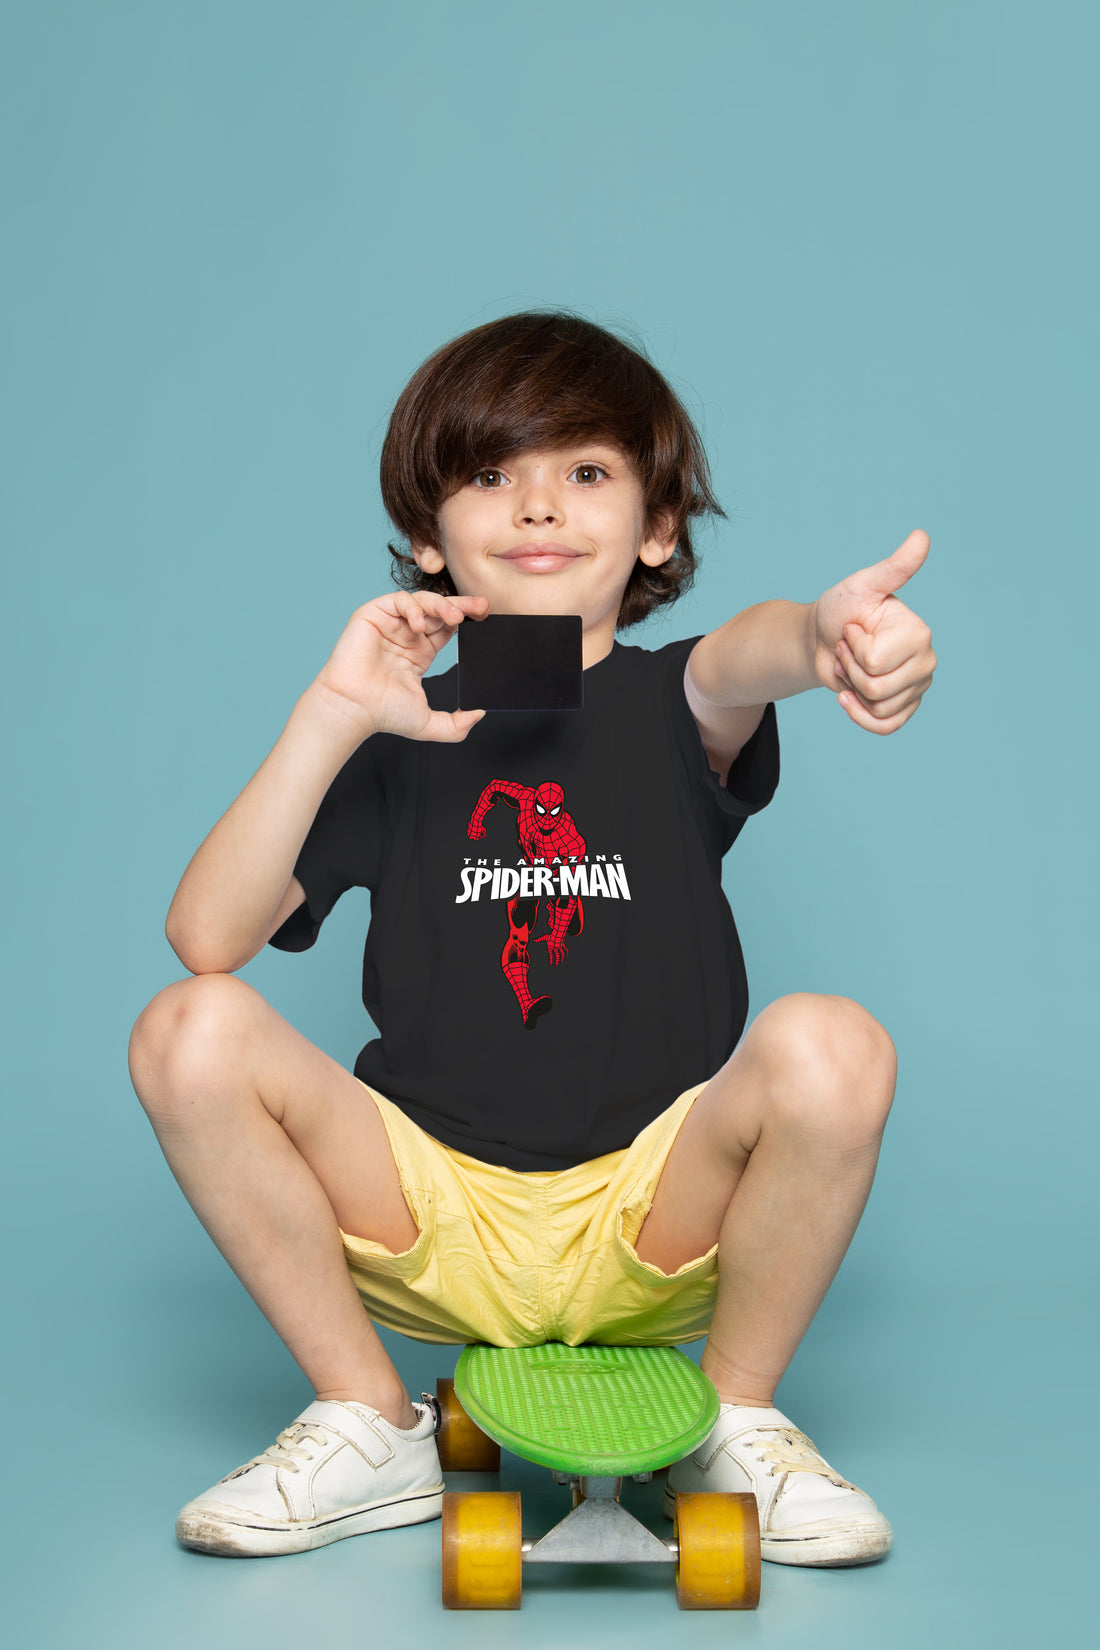 The Amazing Spiderman Graphic Pure Cotton Black T-Shirt for Kids - Regular Fit Comfort